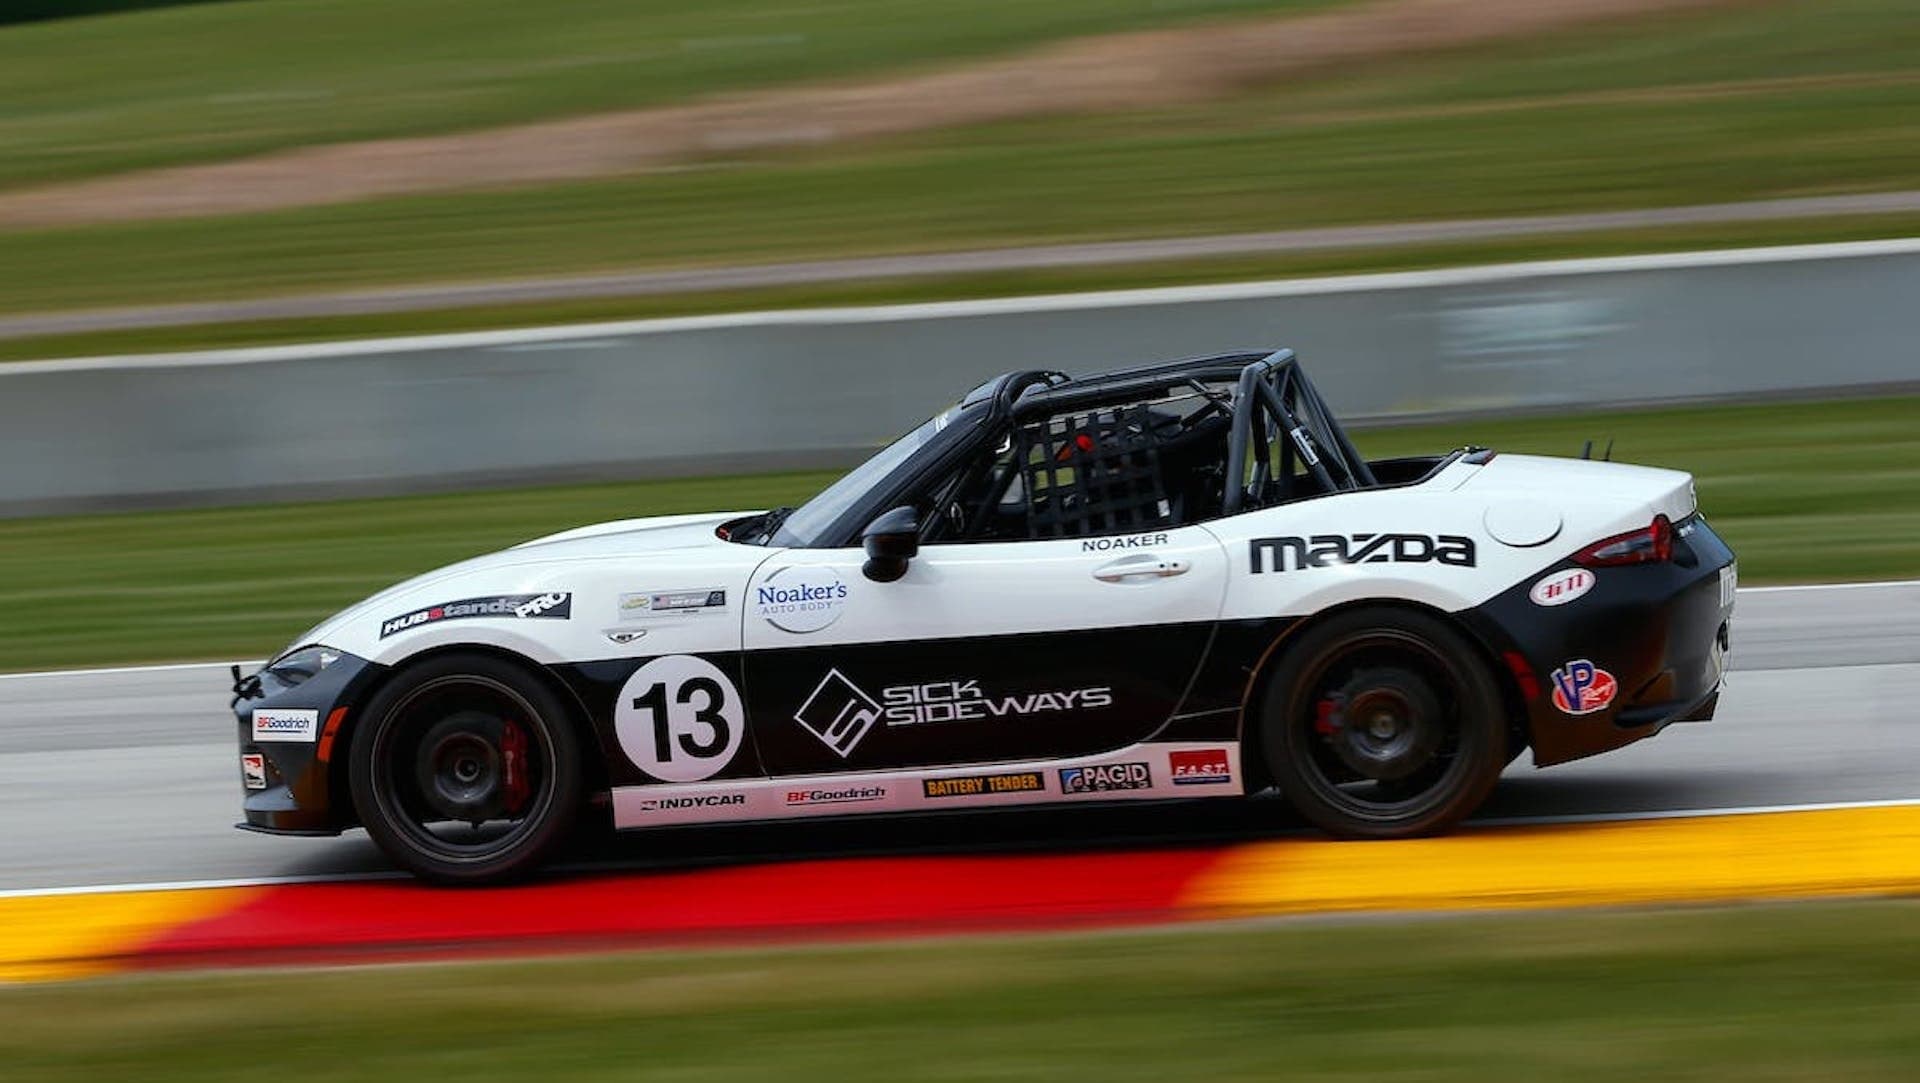 Diversity Shines at This Weekend’s Global Mazda MX-5 Cup at Road America